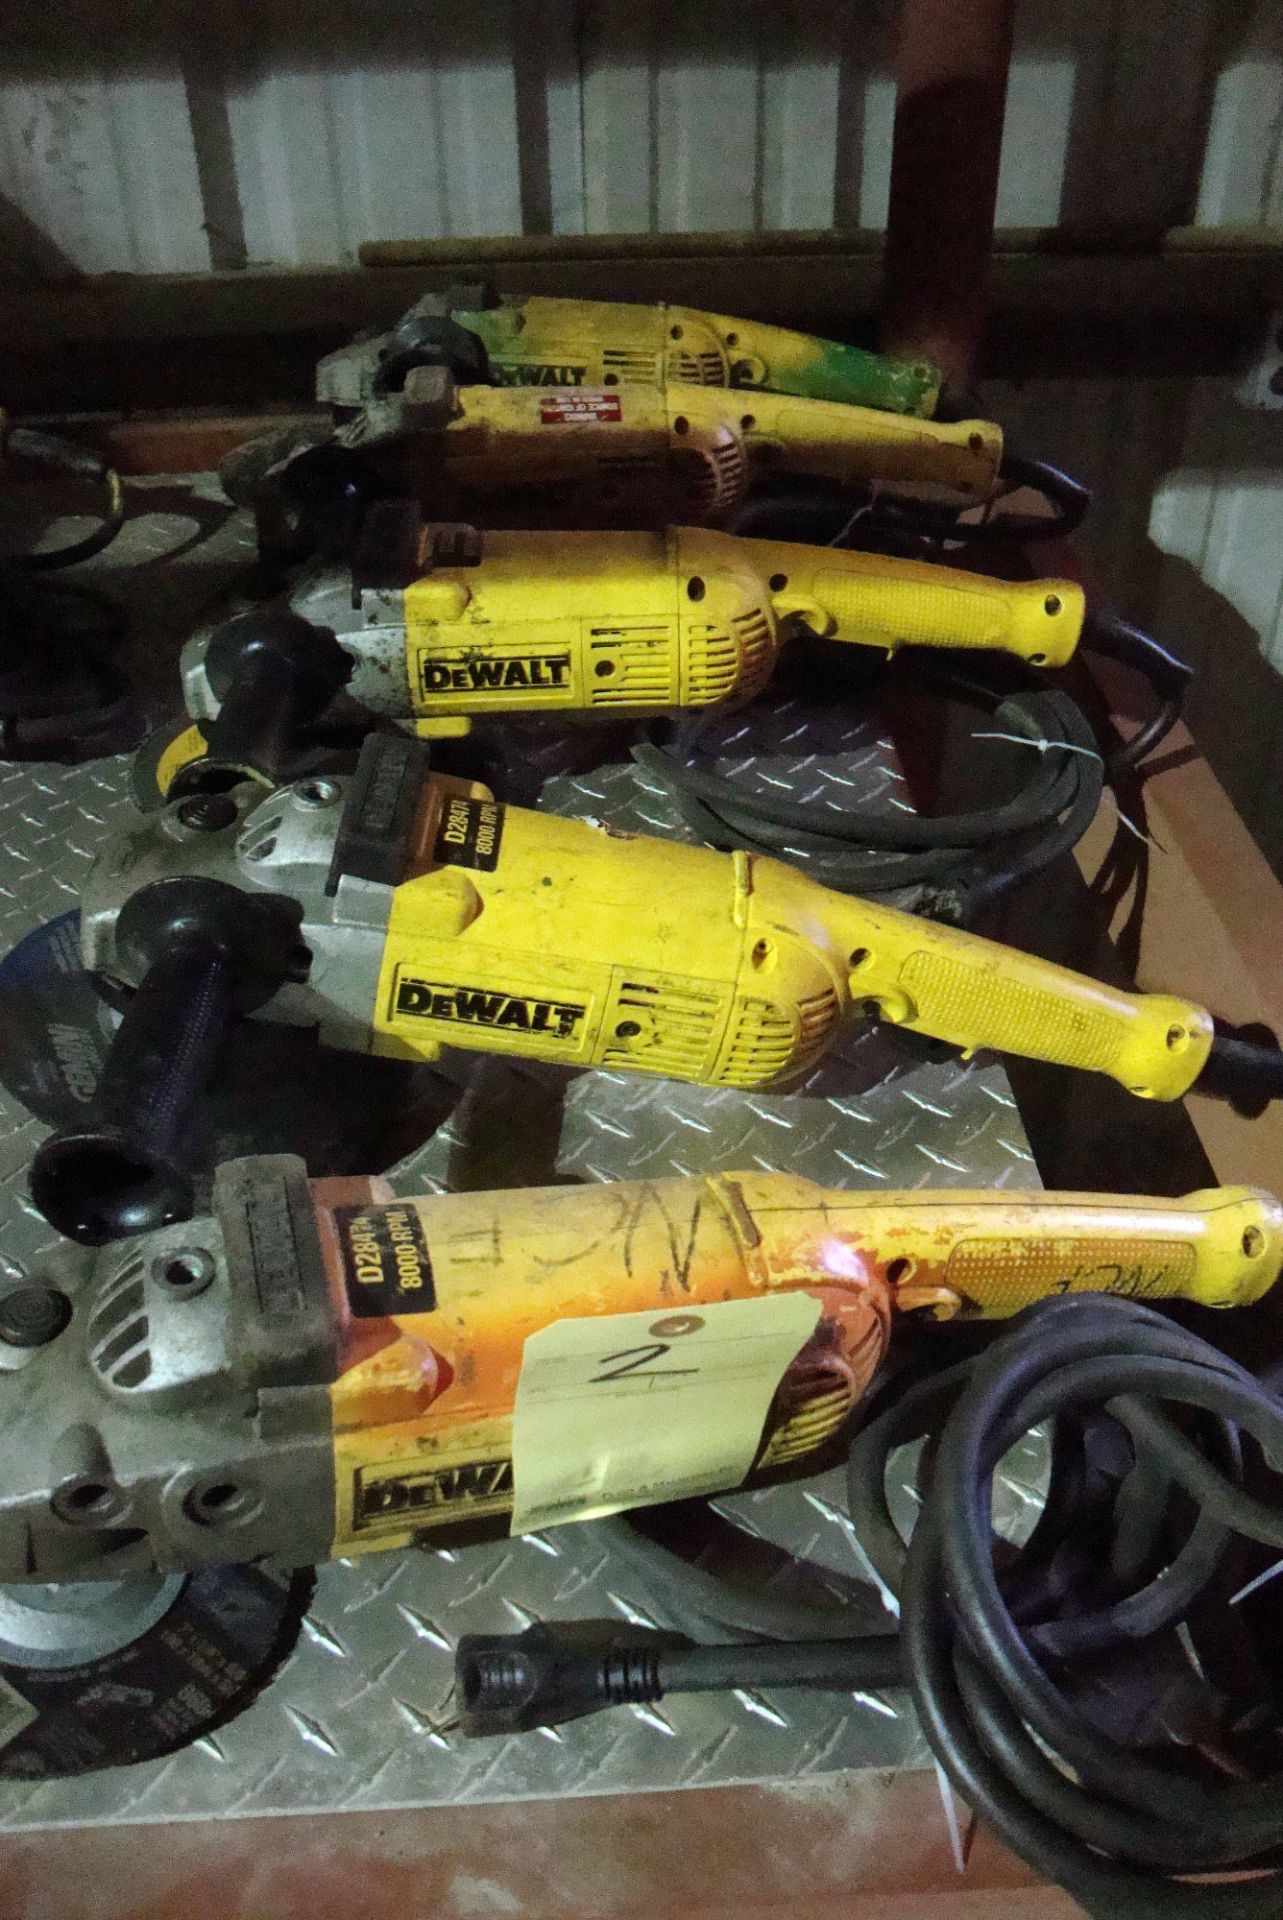 LOT OF ELECTRIC RIGHT ANGLE GRINDERS (5), DEWALT 8", H.D.